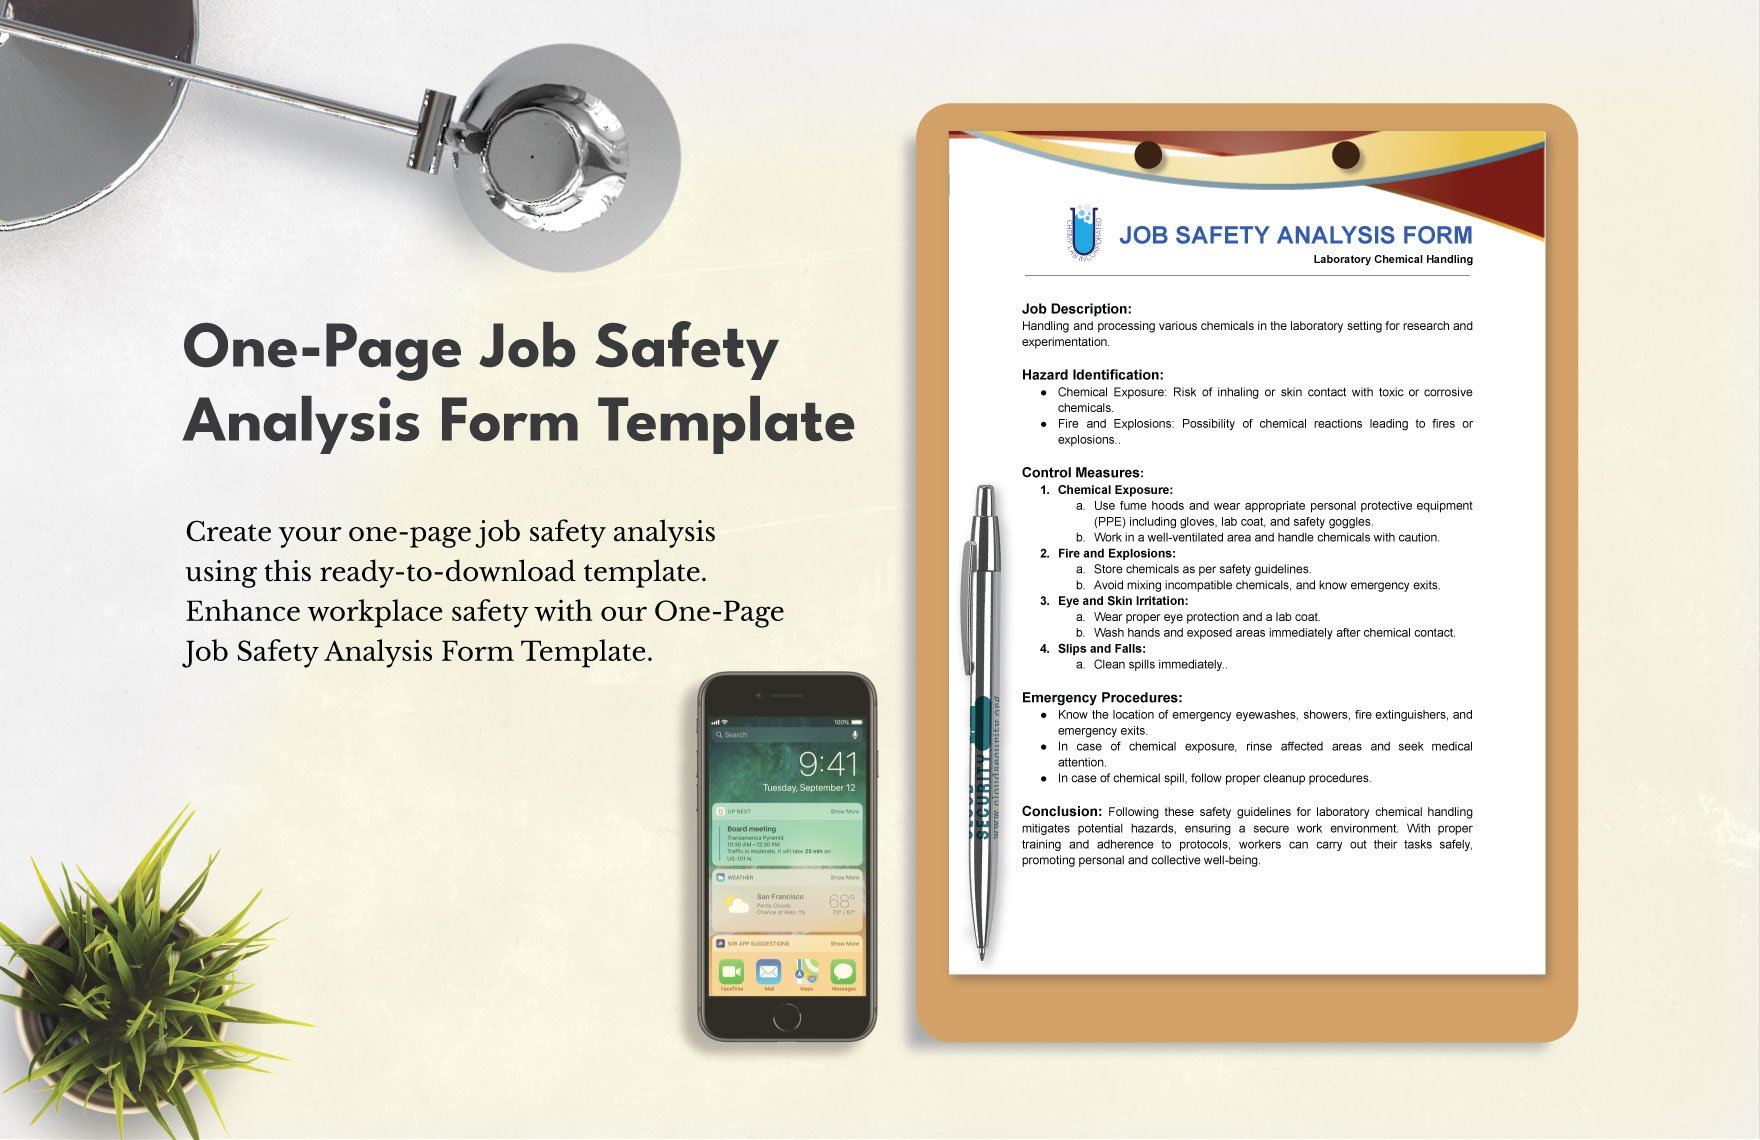 One-Page Job Safety Analysis Form Template